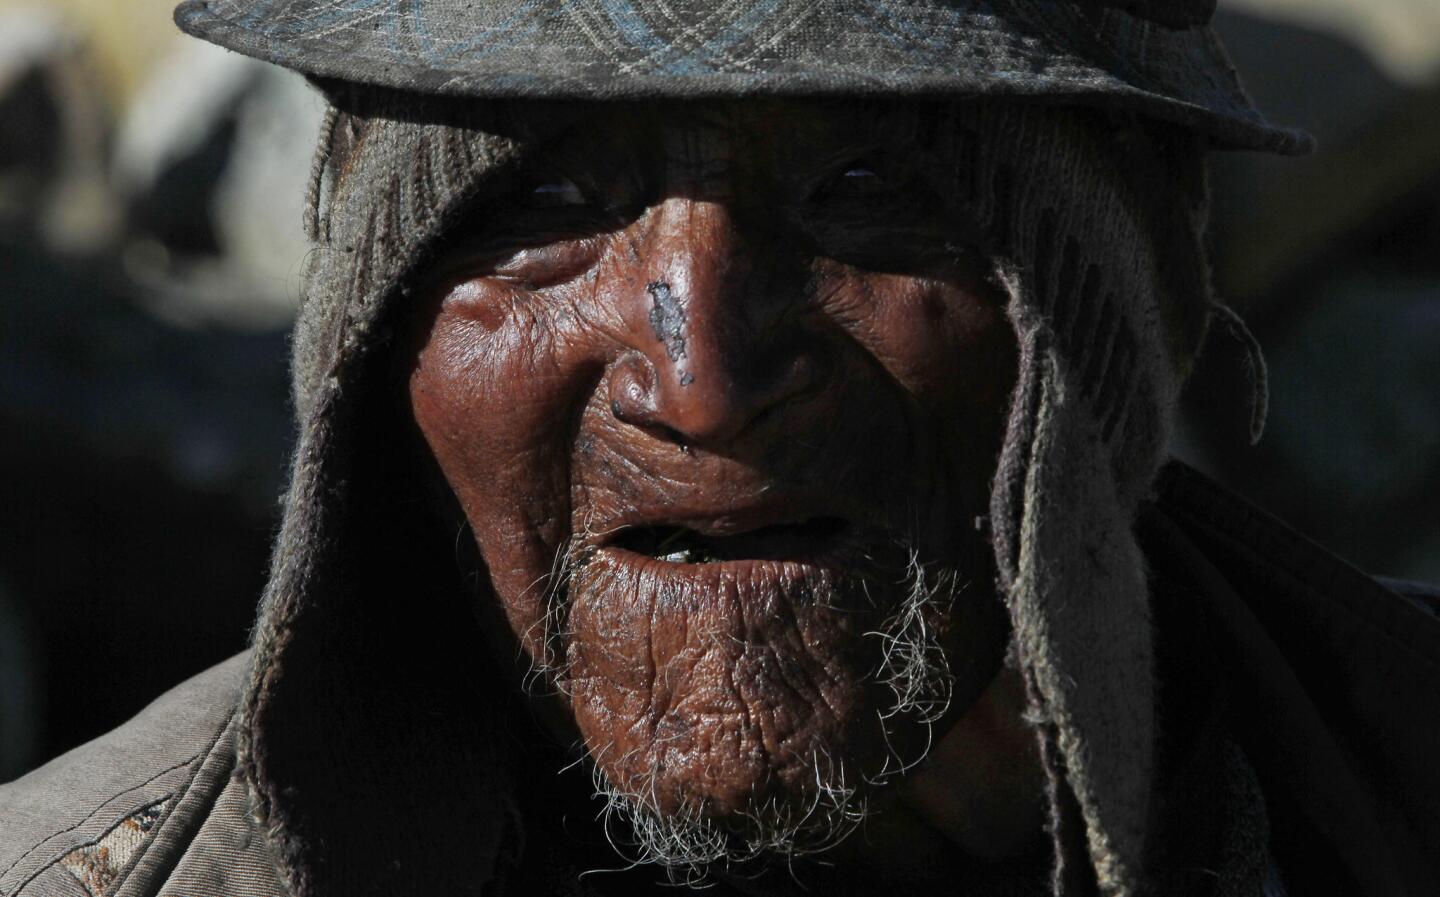 Bolivian villager Carmelo Flores Laura is Aymara -- an indigenous South American tribe. He may be the world's oldest living person.